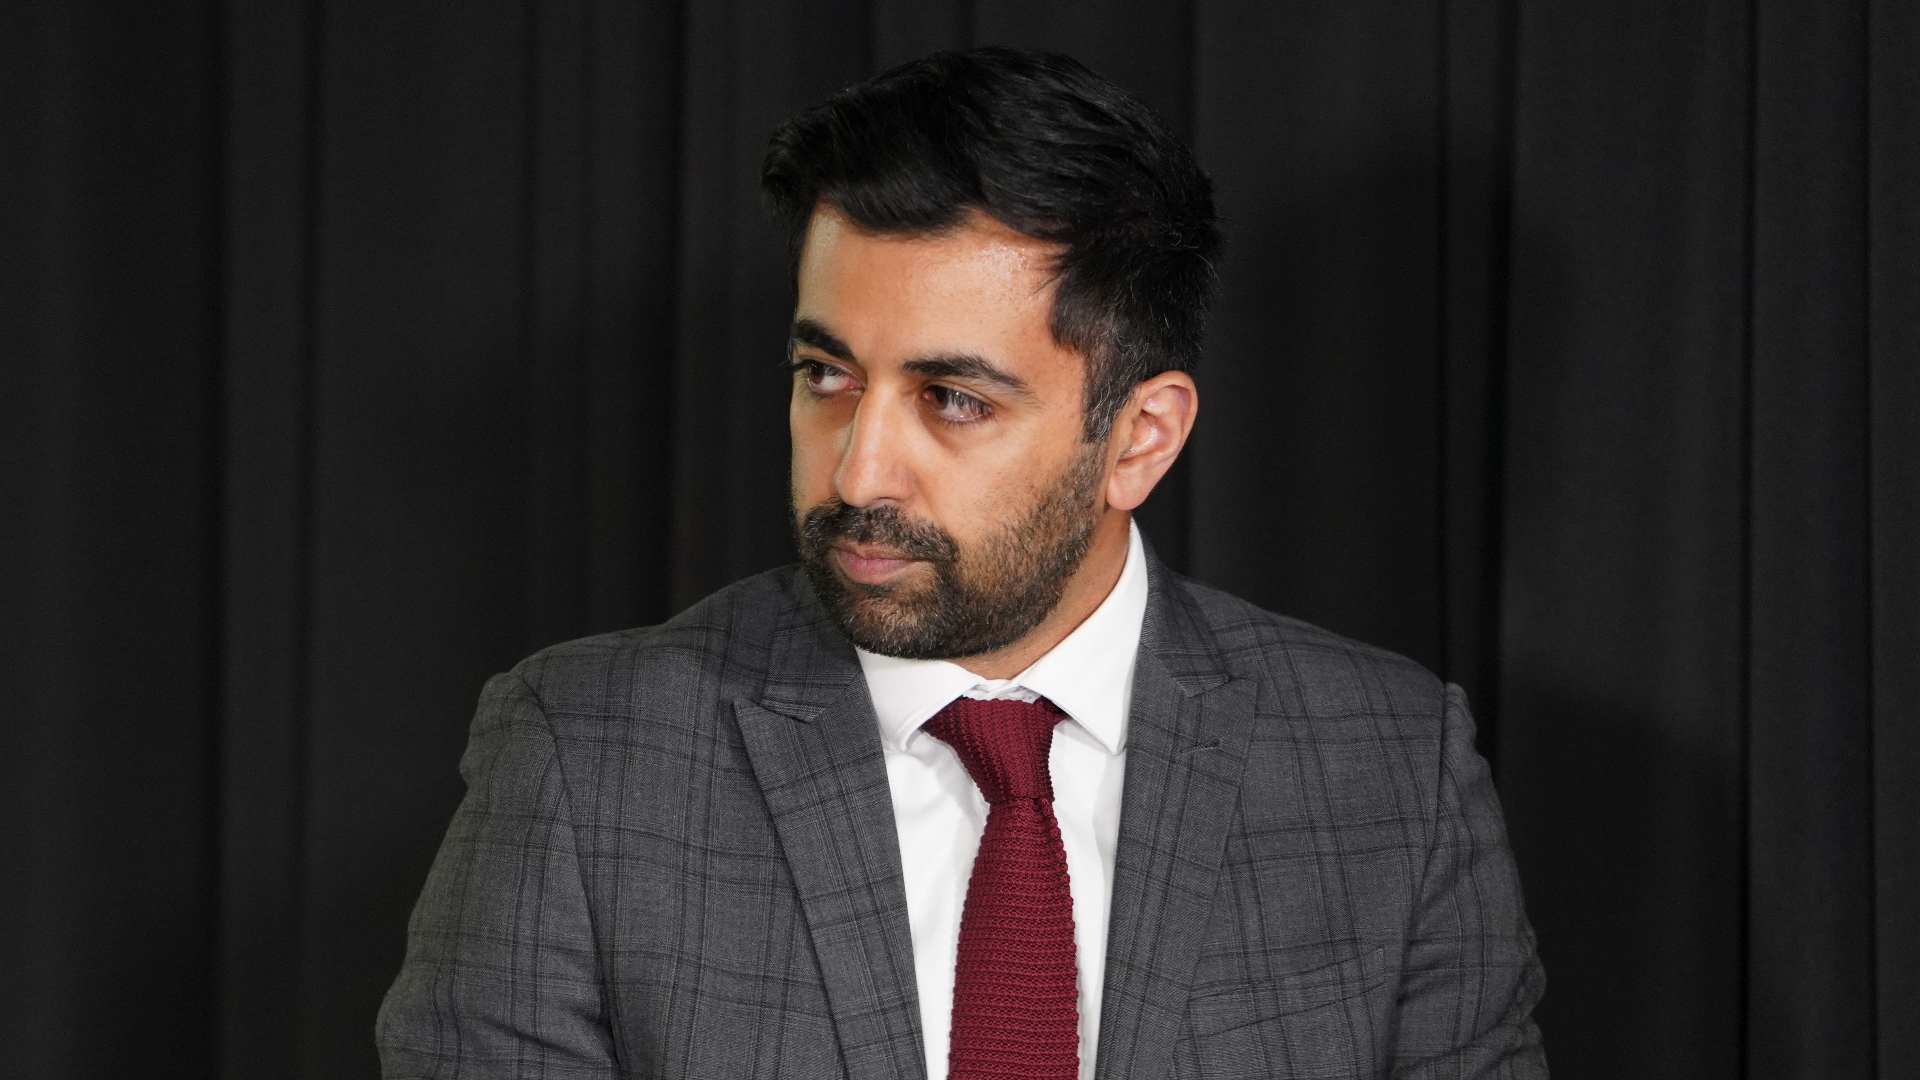 Humza Yousaf said Gillian Martin had 'been on a journey' since making the remarks.